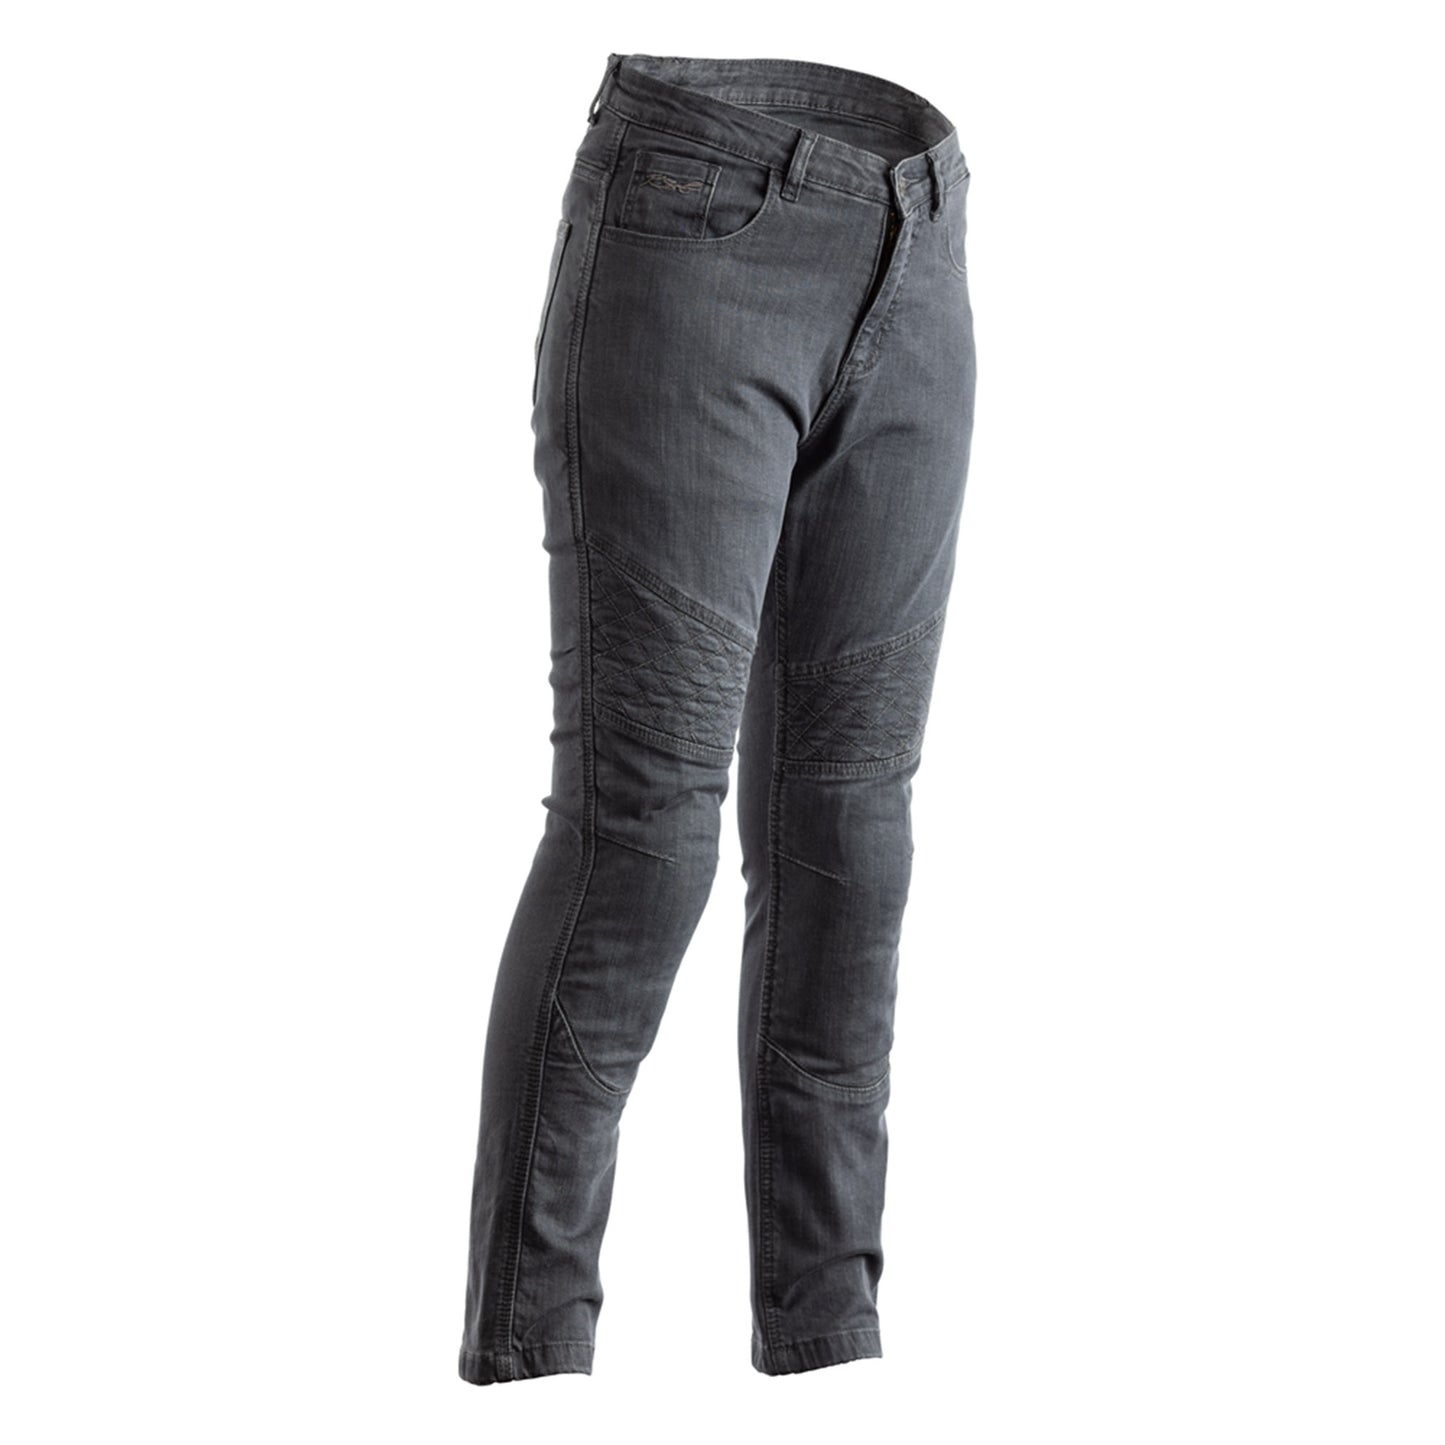 RST Reinforced Straight Leg (CE) Ladies Jeans - Includes Knee Armour - Regular Length - Grey